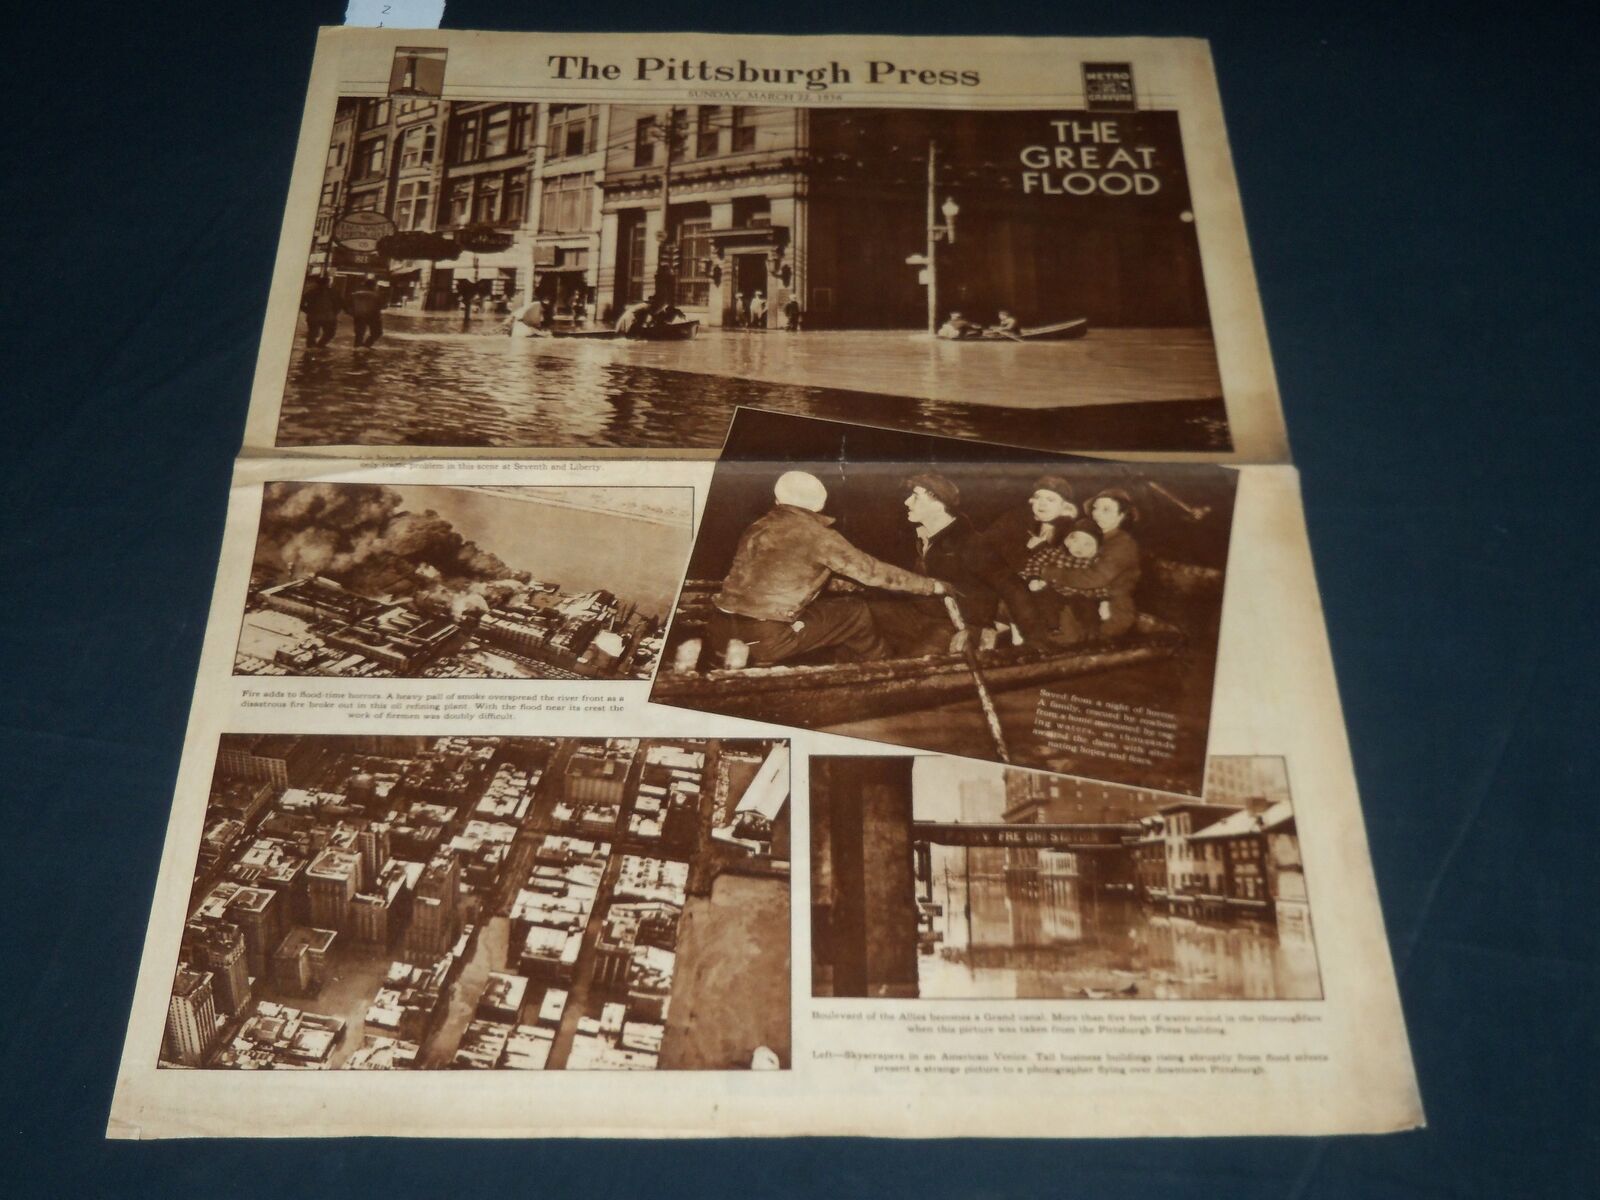 1936 MARCH 22 THE PITTSBURGH PRESS SUNDAY METRO GRAVURE - GREAT FLOOD - NP 4541